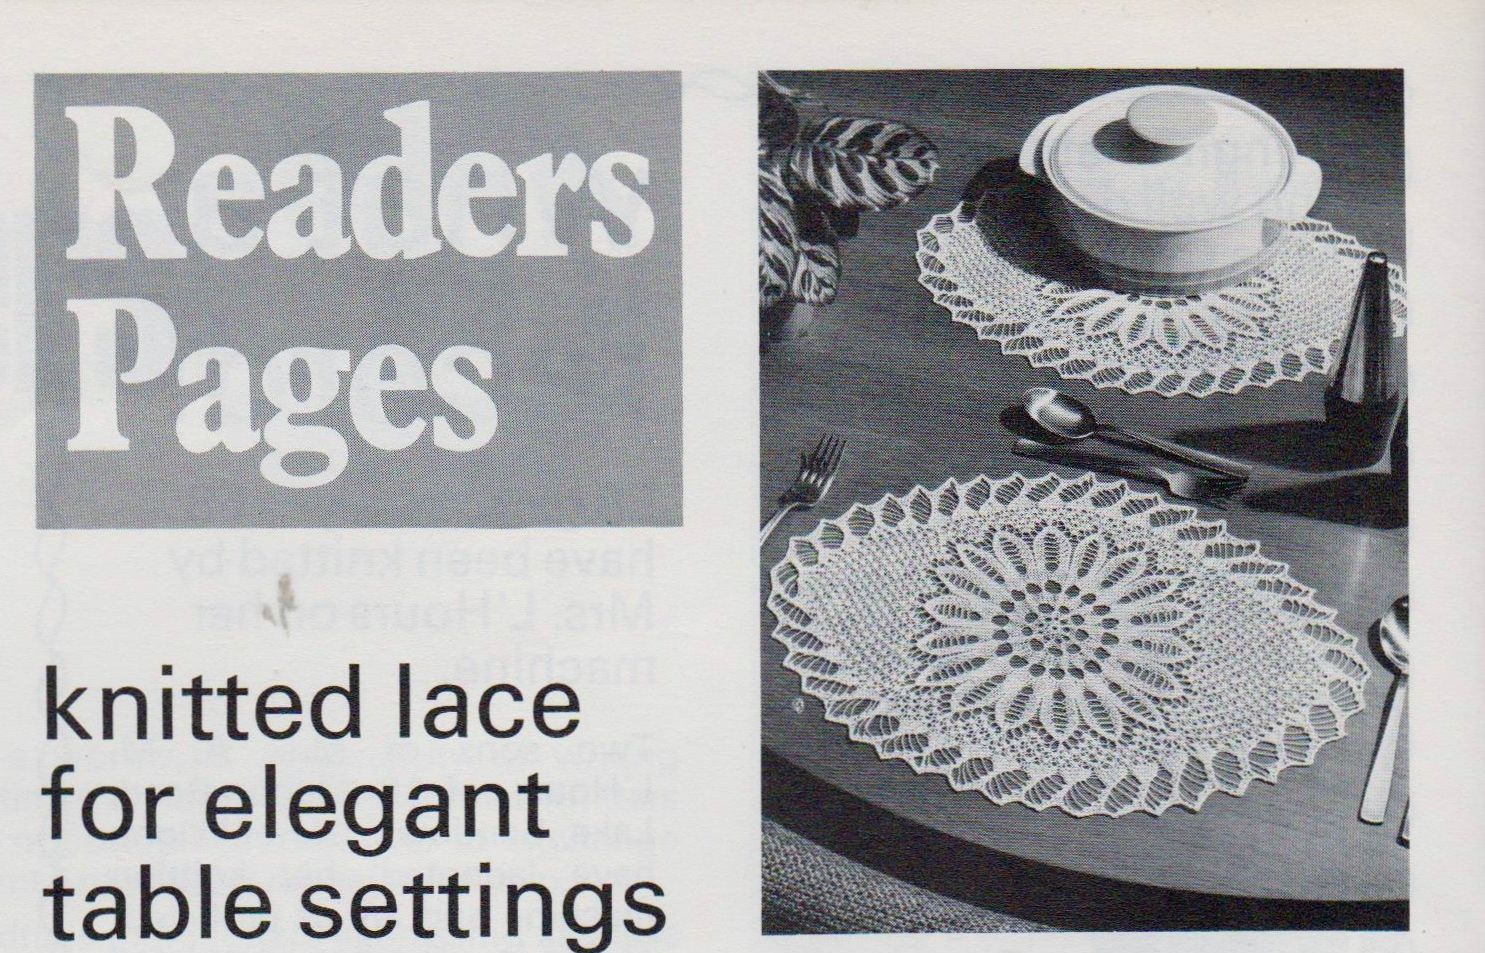 Knitted Lace Pattern Pdf Digital Download Vintage Knitting Pattern To Make Knitted Lace Table Mats Place Mats Or Doilies 16 X 12 In Crochet Cotton 20